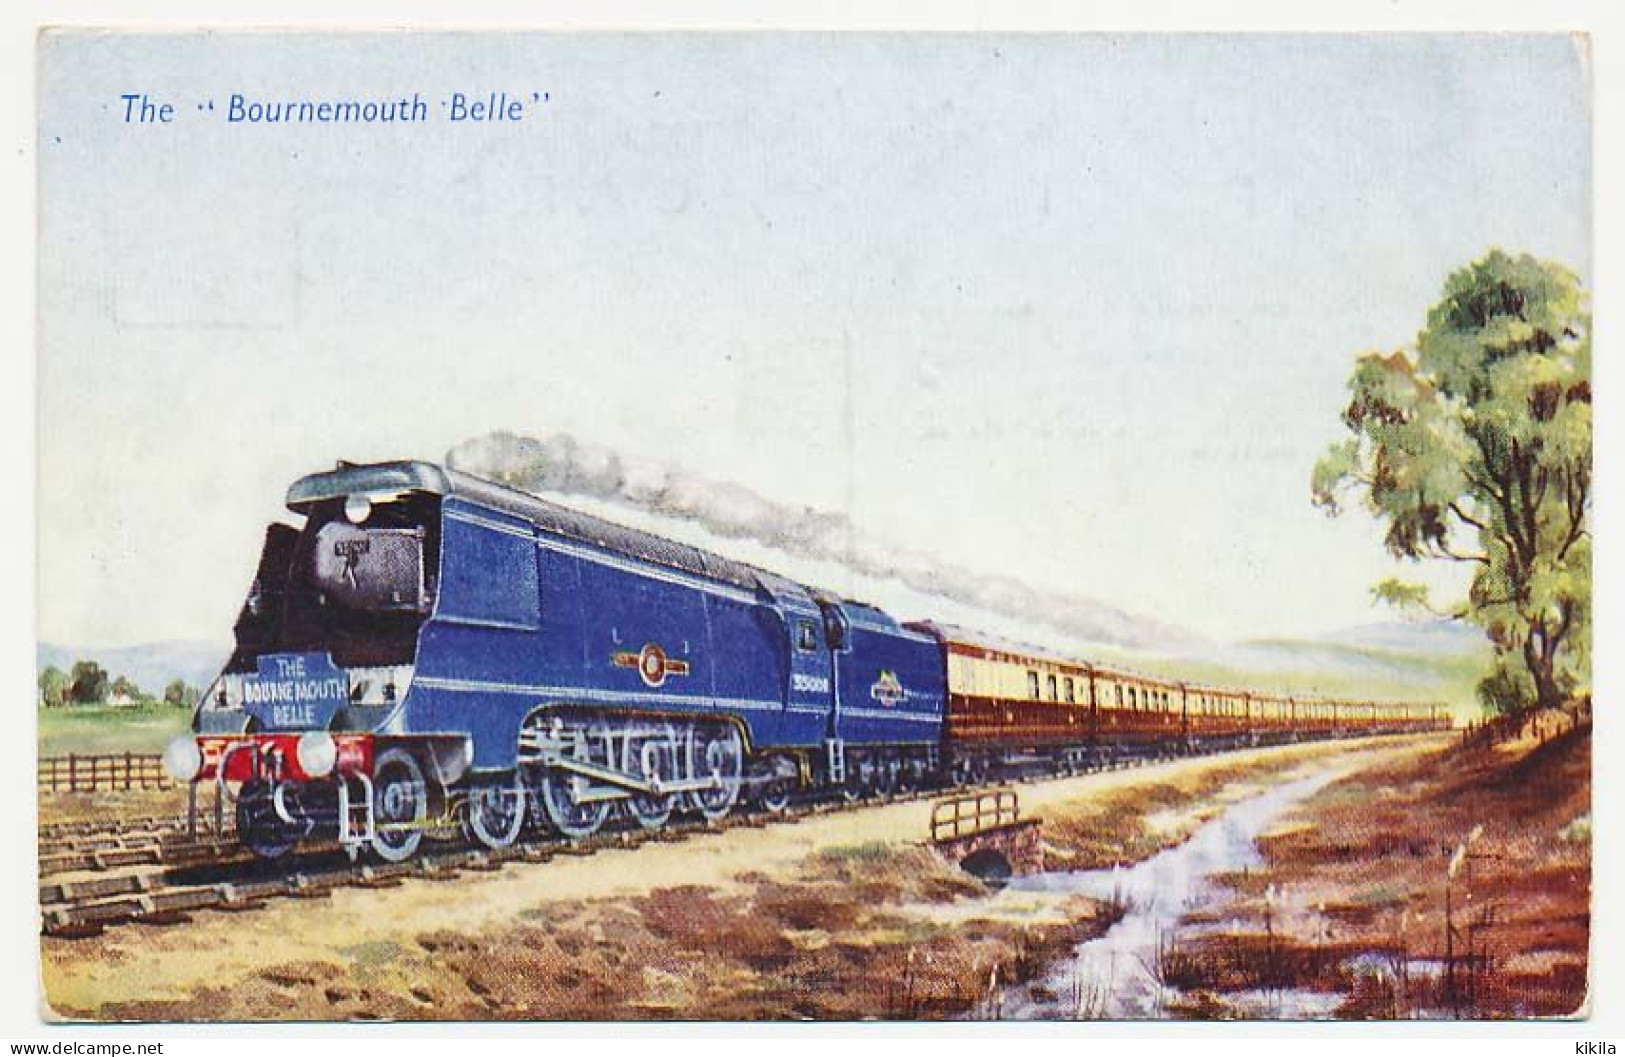 CPSM 9 X 14 Angleterre (262)  Train Locomotive The "Bournemouth Belle Hauled By Merchant Navy" Class 4.6.2 "Pacific" * - Trains